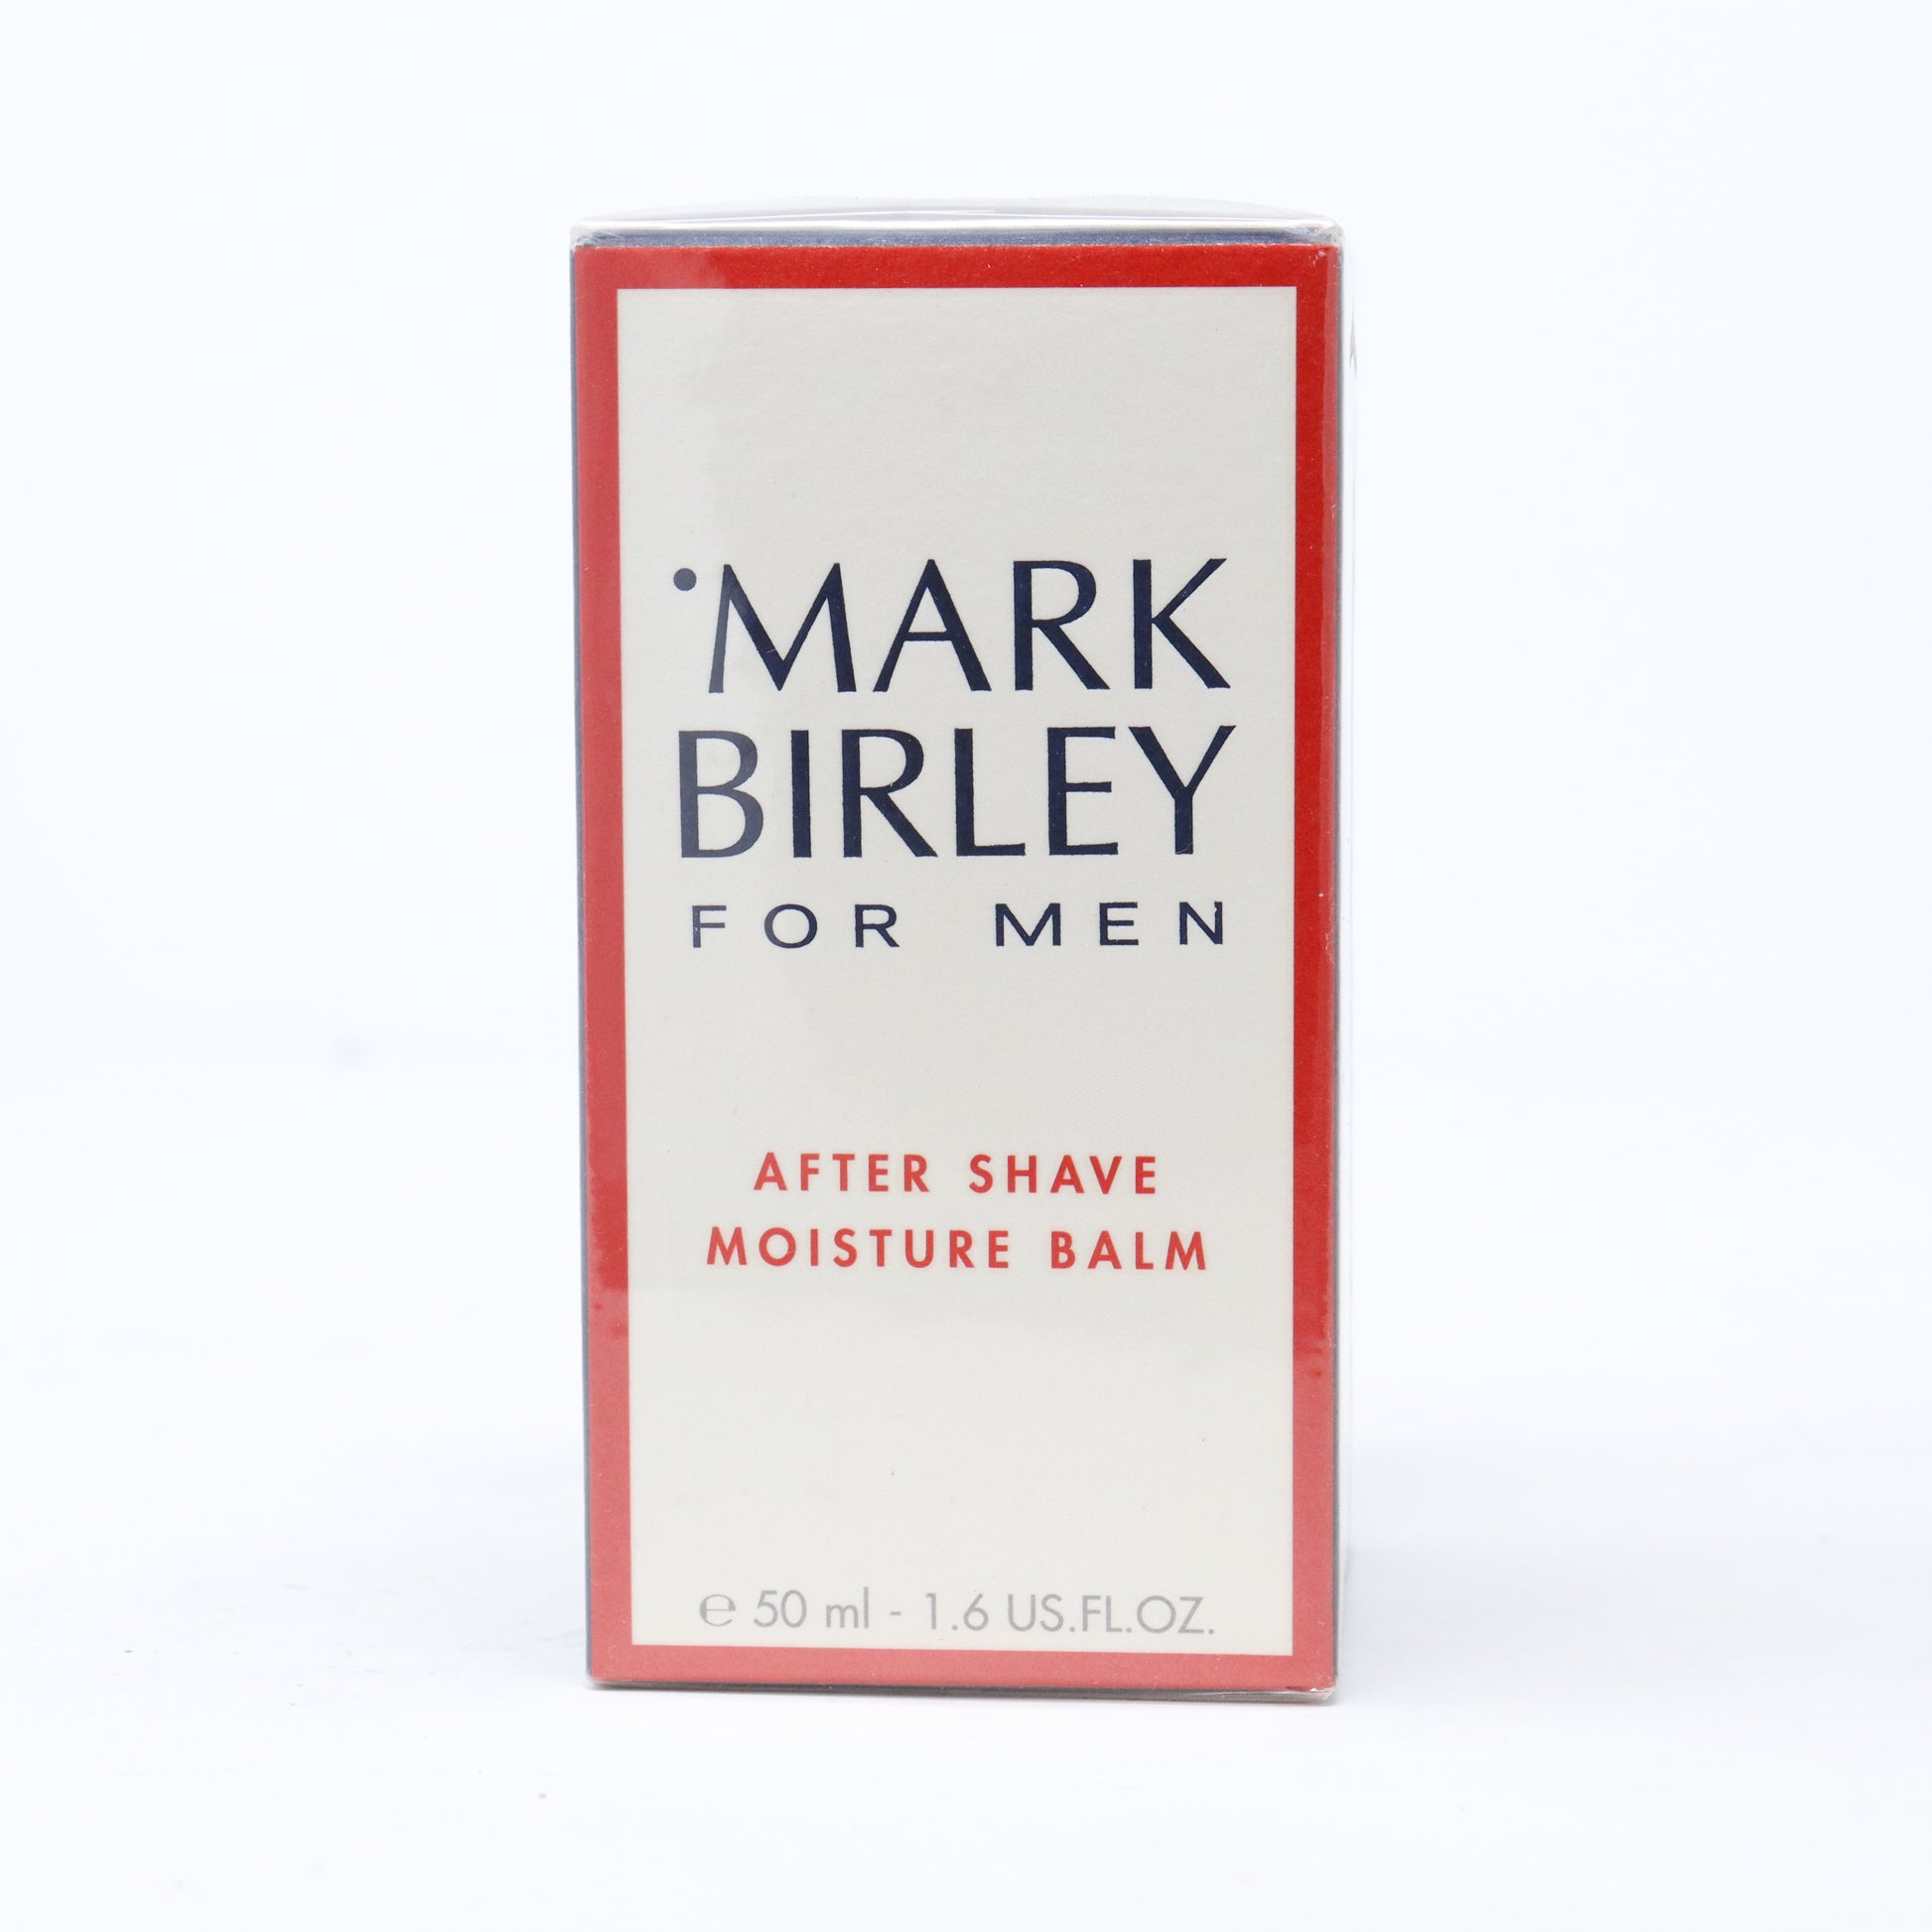 For Men After Shave Moisture Balm 50 ml